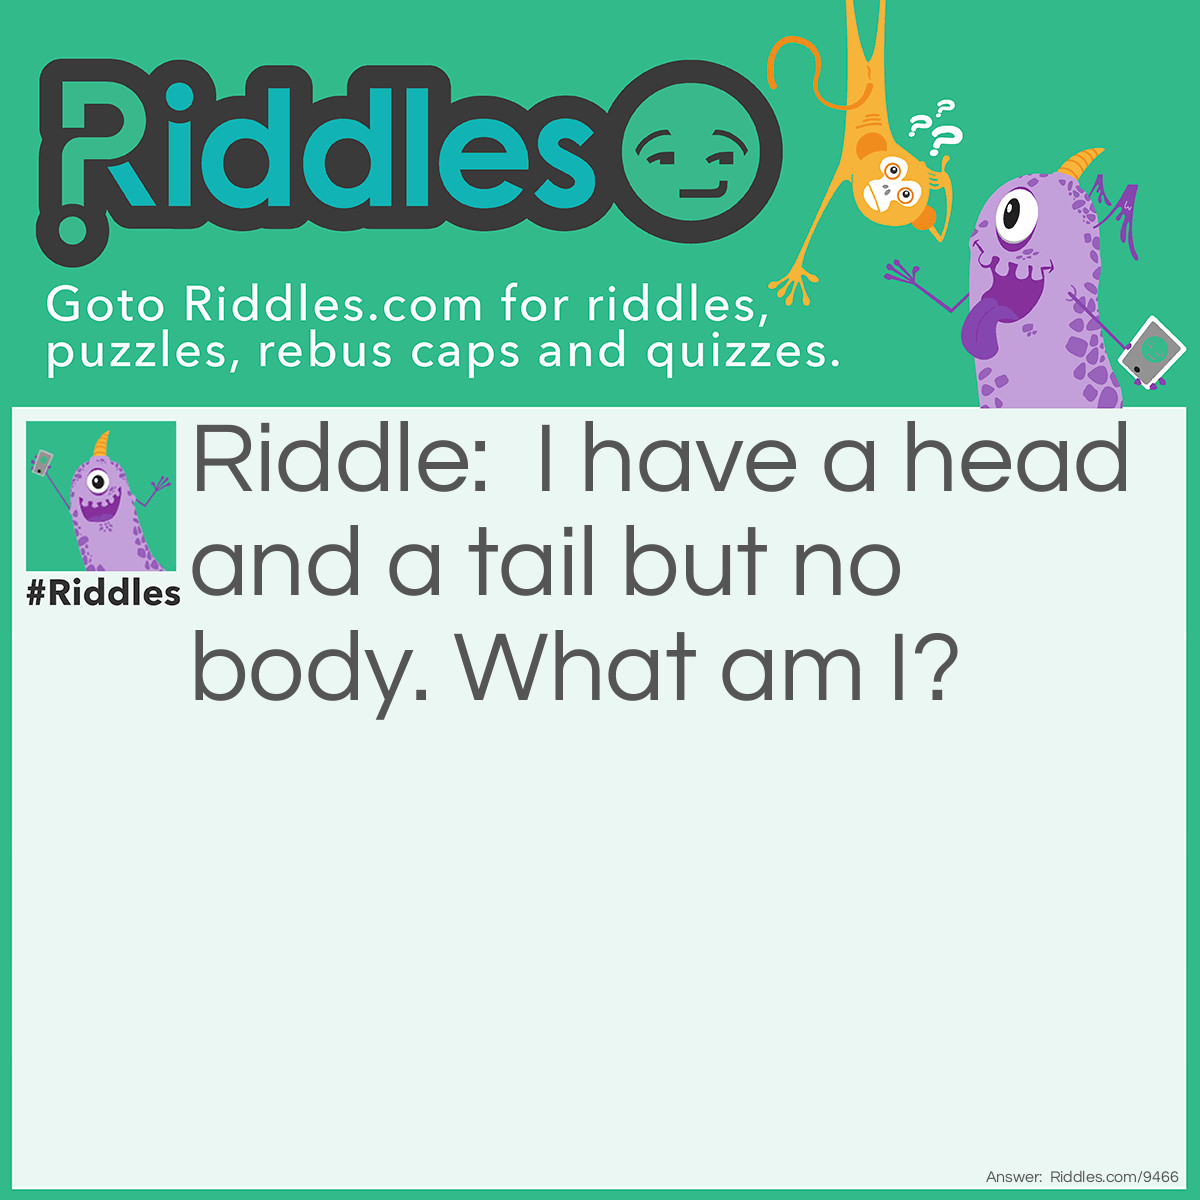 Riddle: I have a head and a tail but no body. What am I? Answer: Coin.